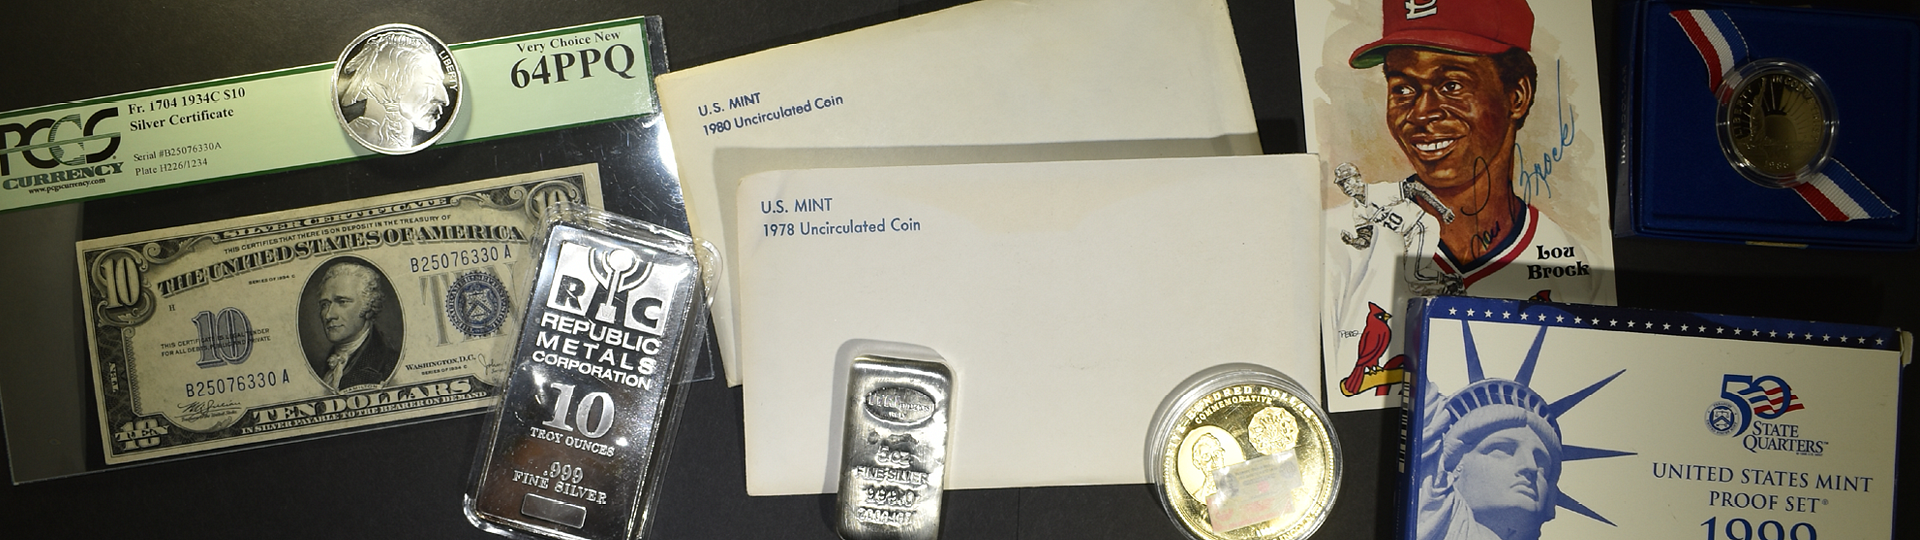 February 6th Silver City Rare Coins & Currency  by Silver City Auctions